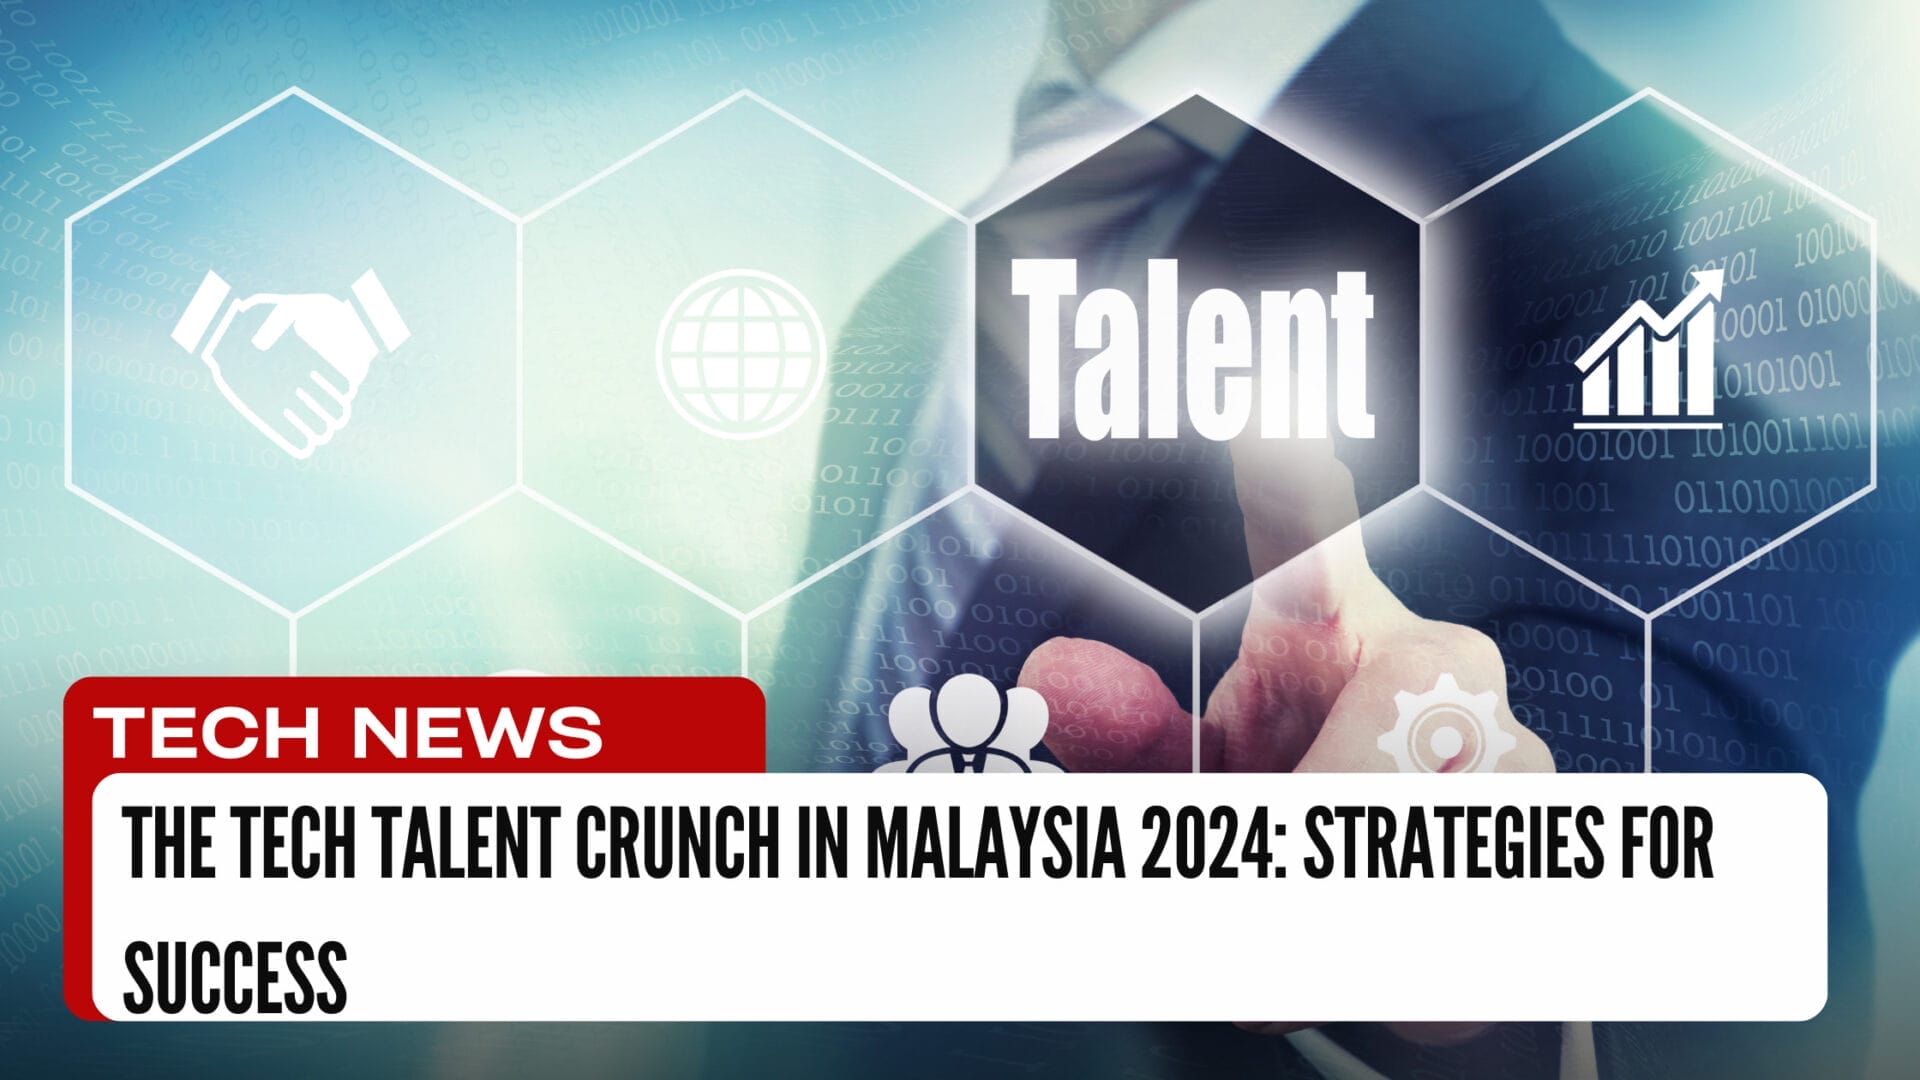 The Tech Talent Crunch in Malaysia 2024 Strategies for Success